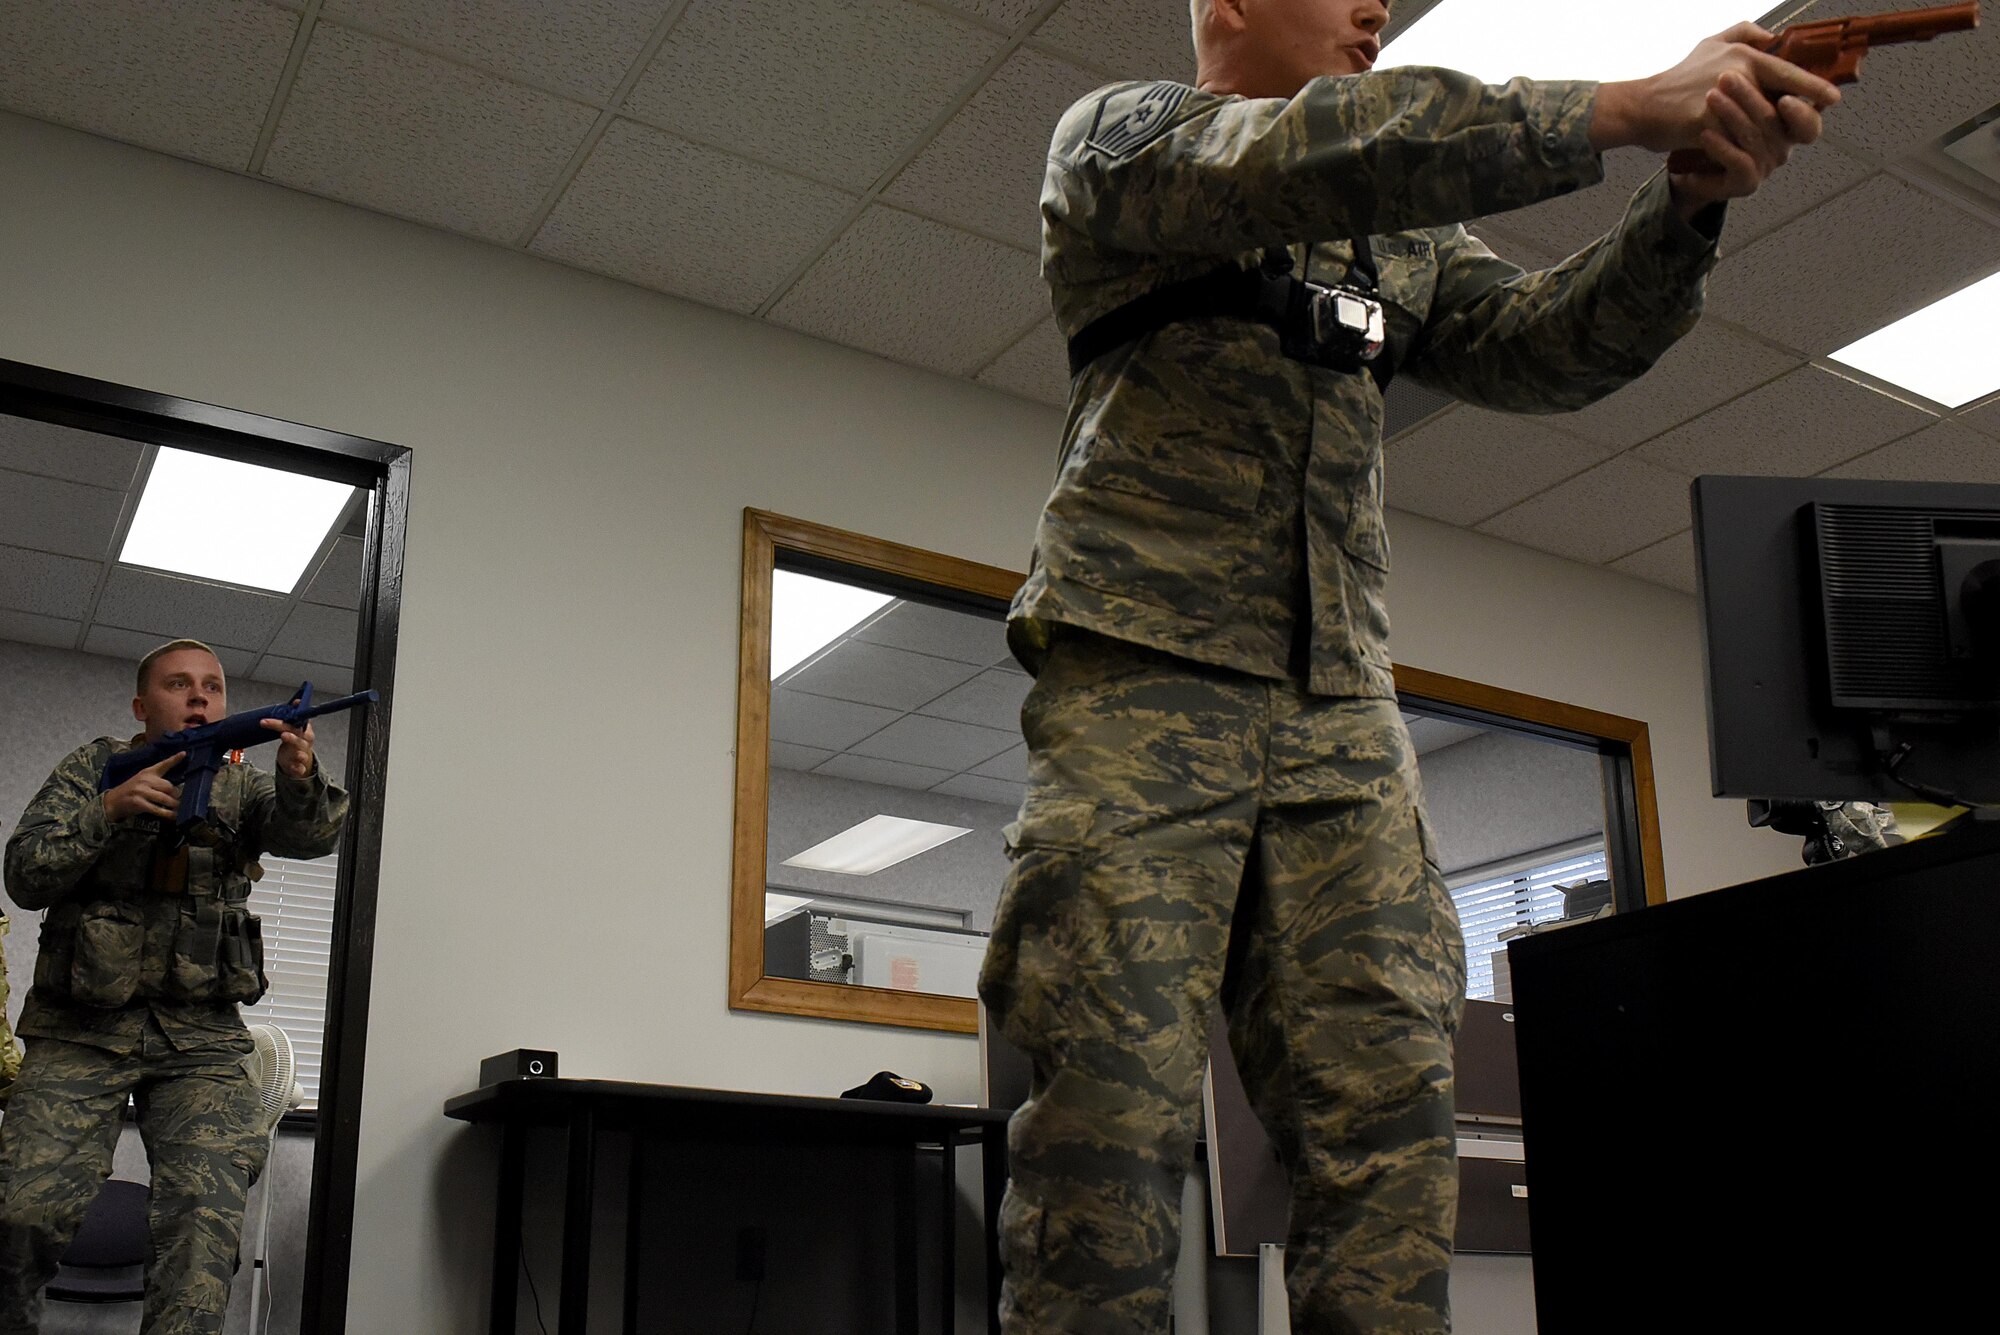 Senior Airman James Bugaj, 4th Security Forces Squadron patrolman, responds to an “active shooter” situation during a planned exercise, Jan. 11, 2017, at Seymour Johnson Air Force Base, North Carolina. Defenders of the 4th SFS immediately followed established procedures to respond to and neutralize the simulated threat. (U.S. Air Force photo by Airman 1st Class Kenneth Boyton)